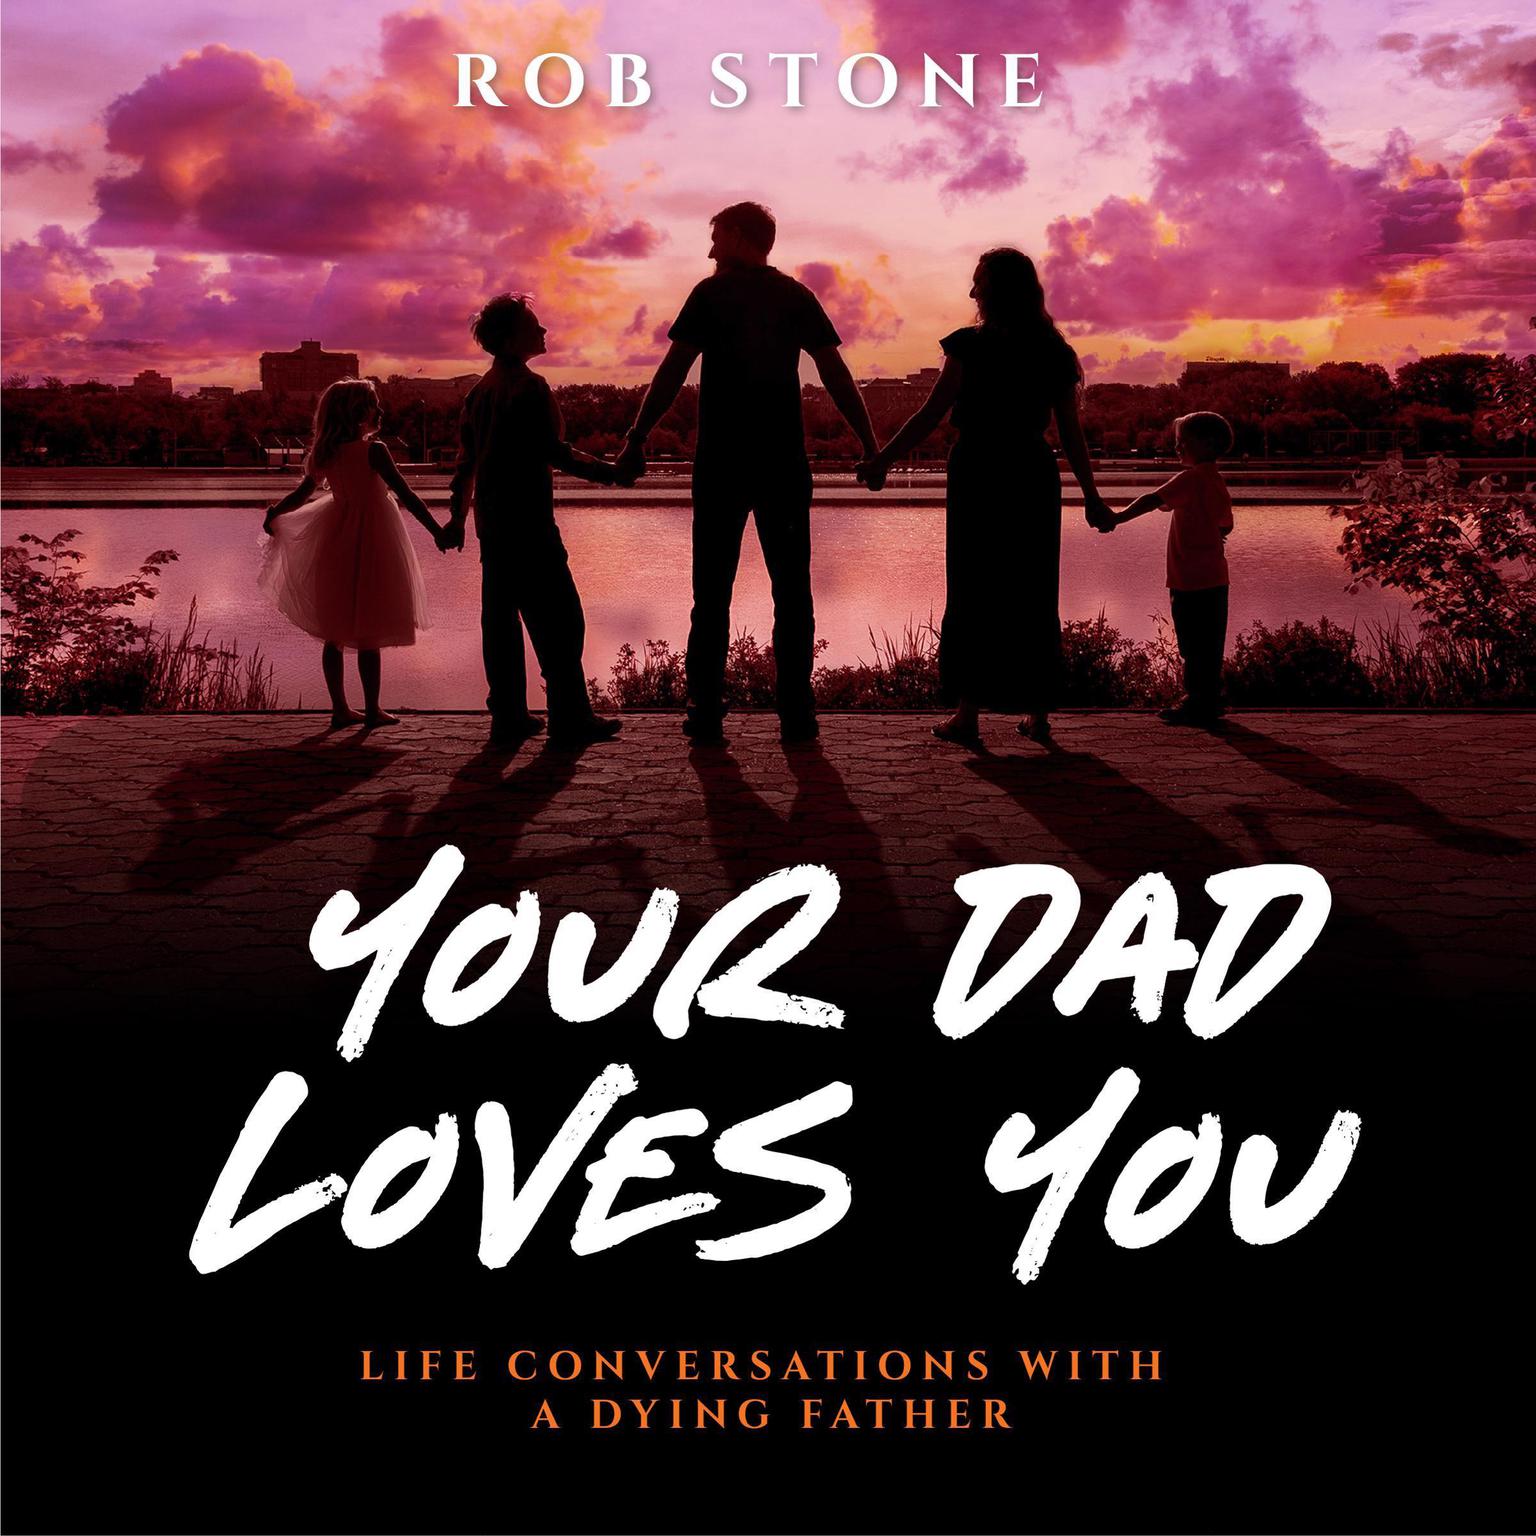 Your Dad Loves You! Life Conversations with a Dying Father: Life Conversations with a Dying Father Audiobook, by Rob Stone